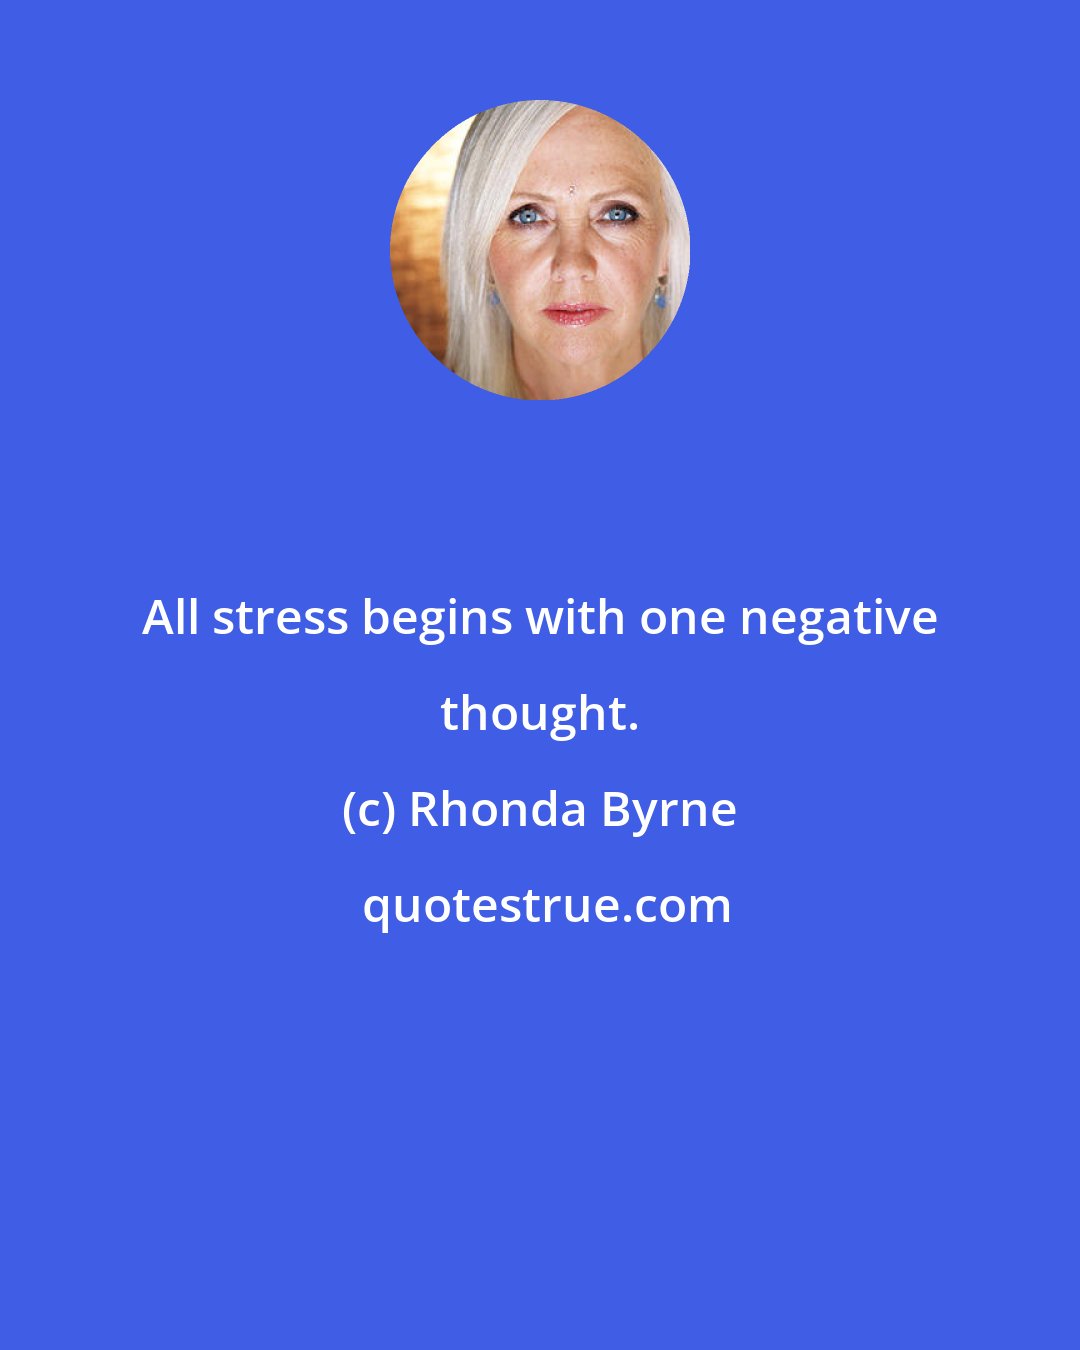 Rhonda Byrne: All stress begins with one negative thought.